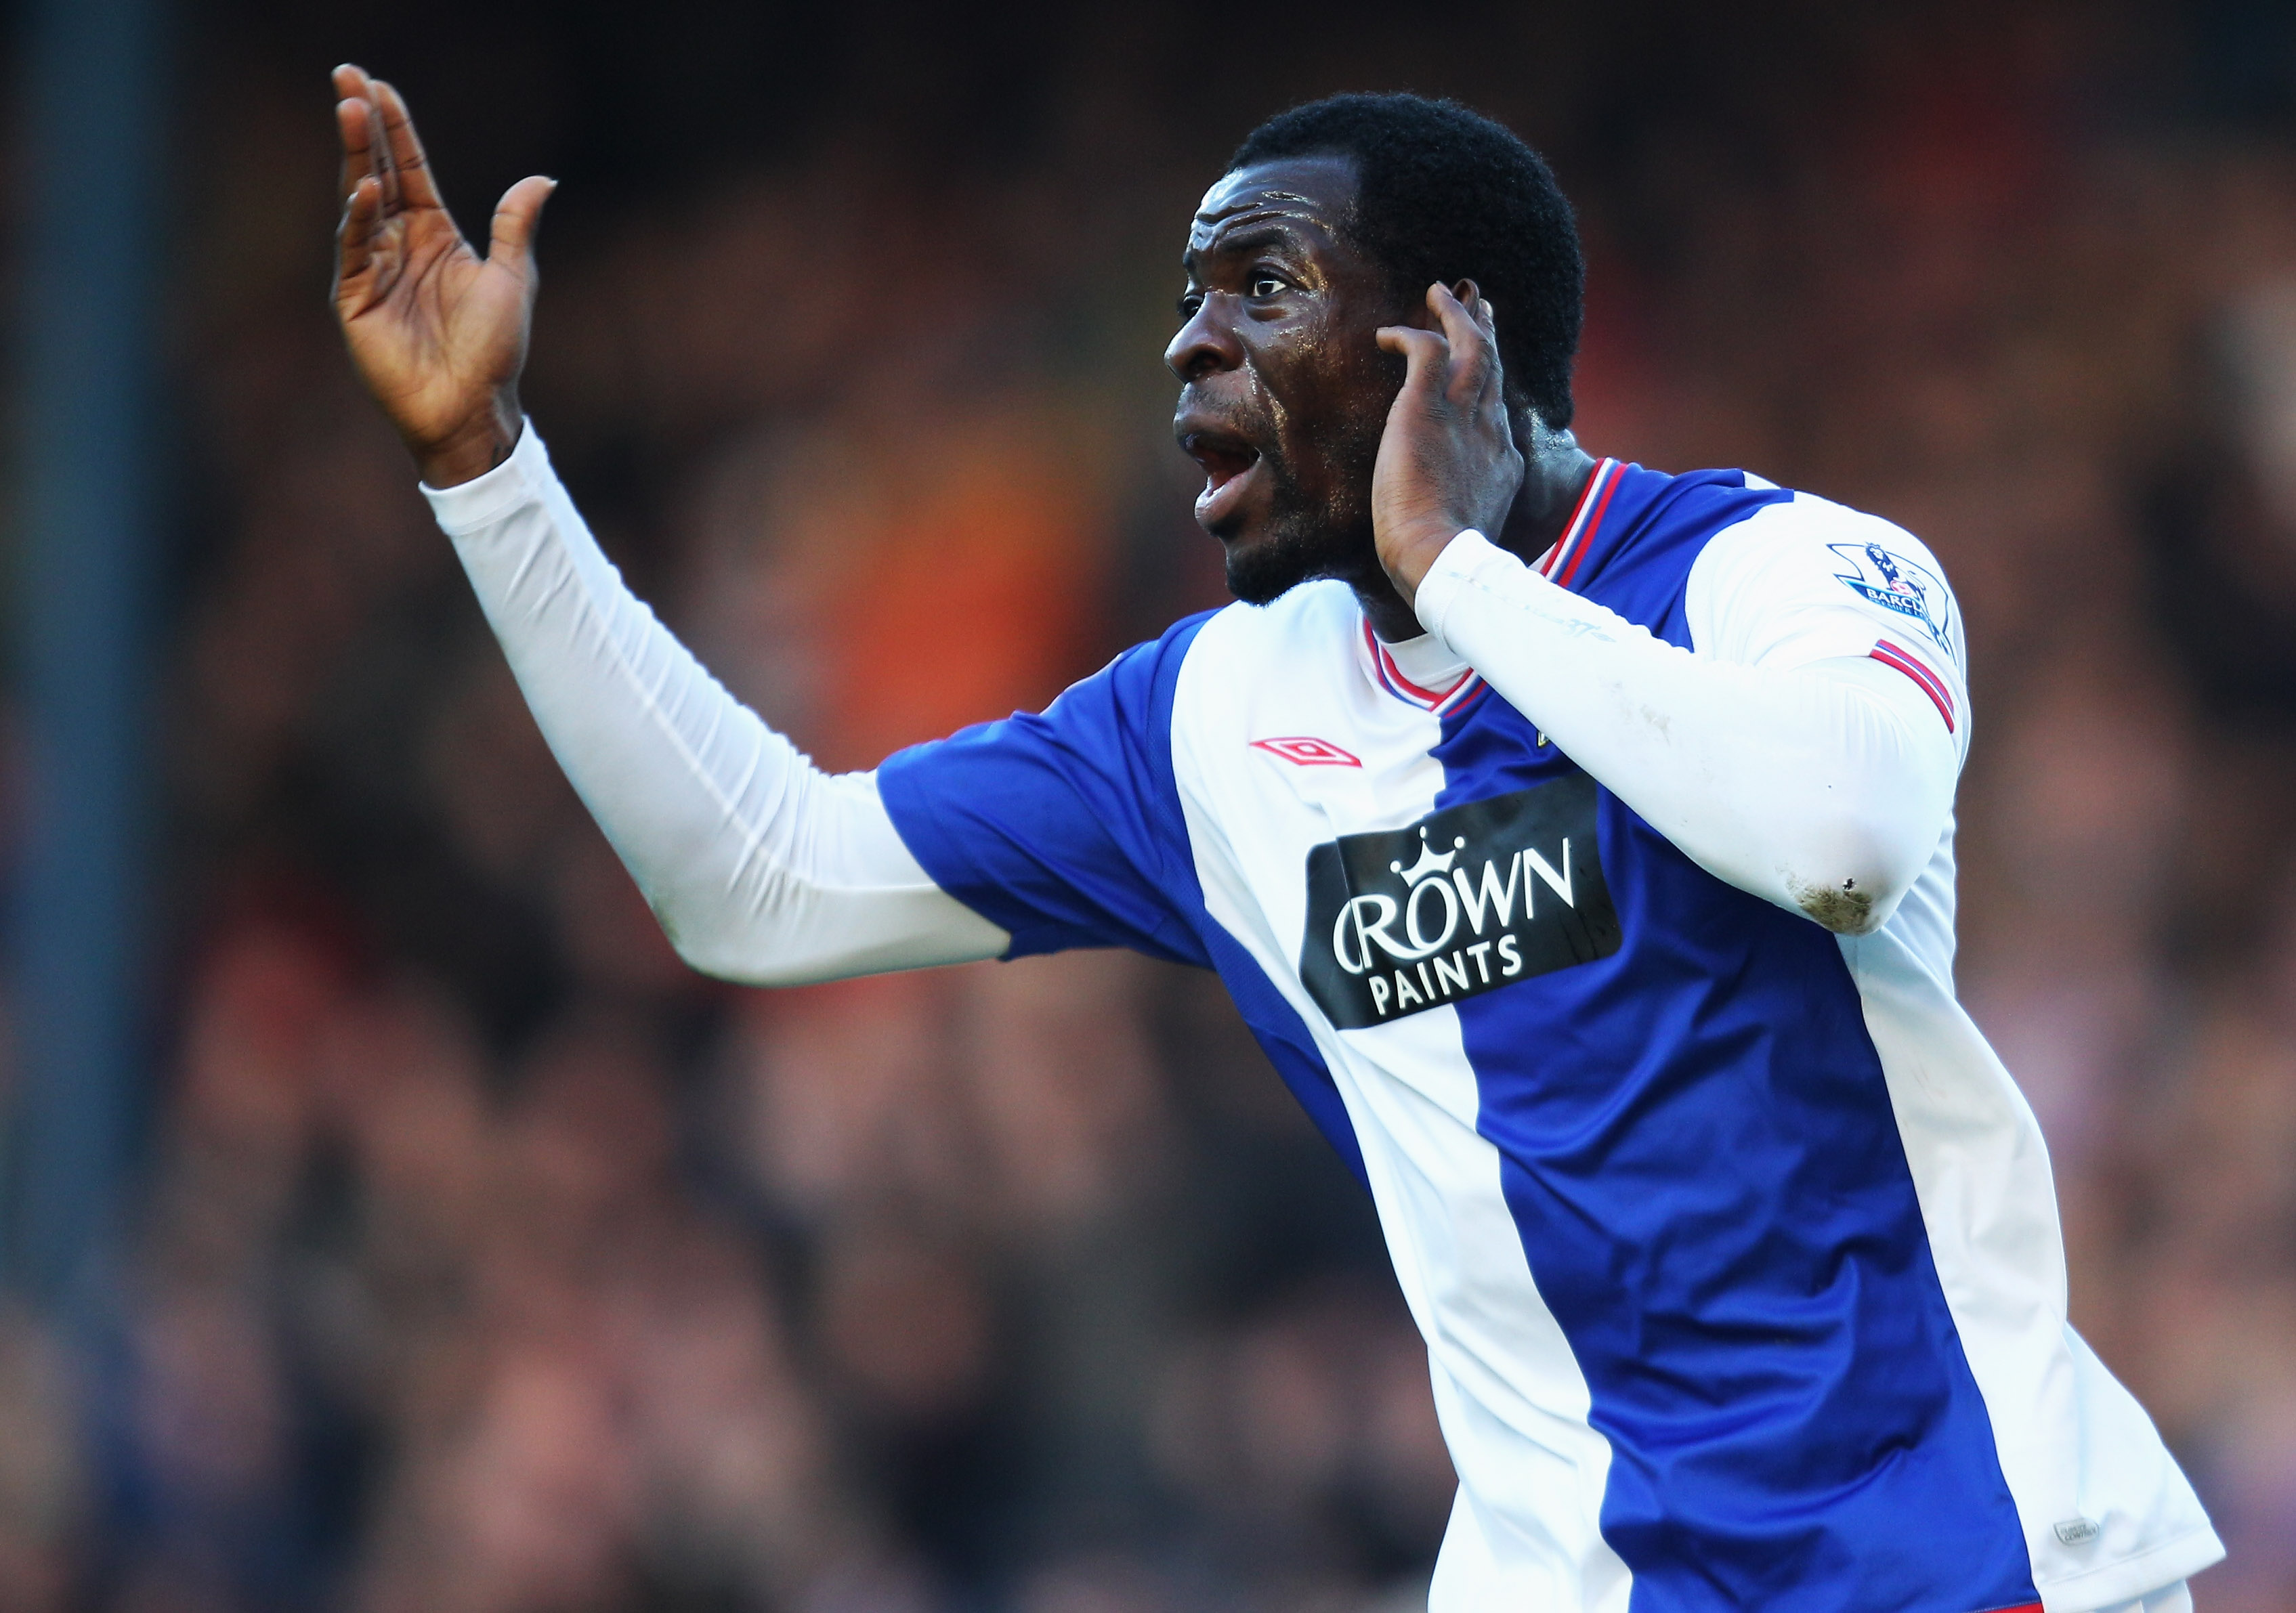 BLACKBURN, ENGLAND - JANUARY 17:  Chris Samba of Blackburn celebrates his goal by gesturing to the home fans during the Barclays Premier League match between Blackburn Rovers and Fulham at Ewood Park on January 17, 2010 in Blackburn, England.  (Photo by M